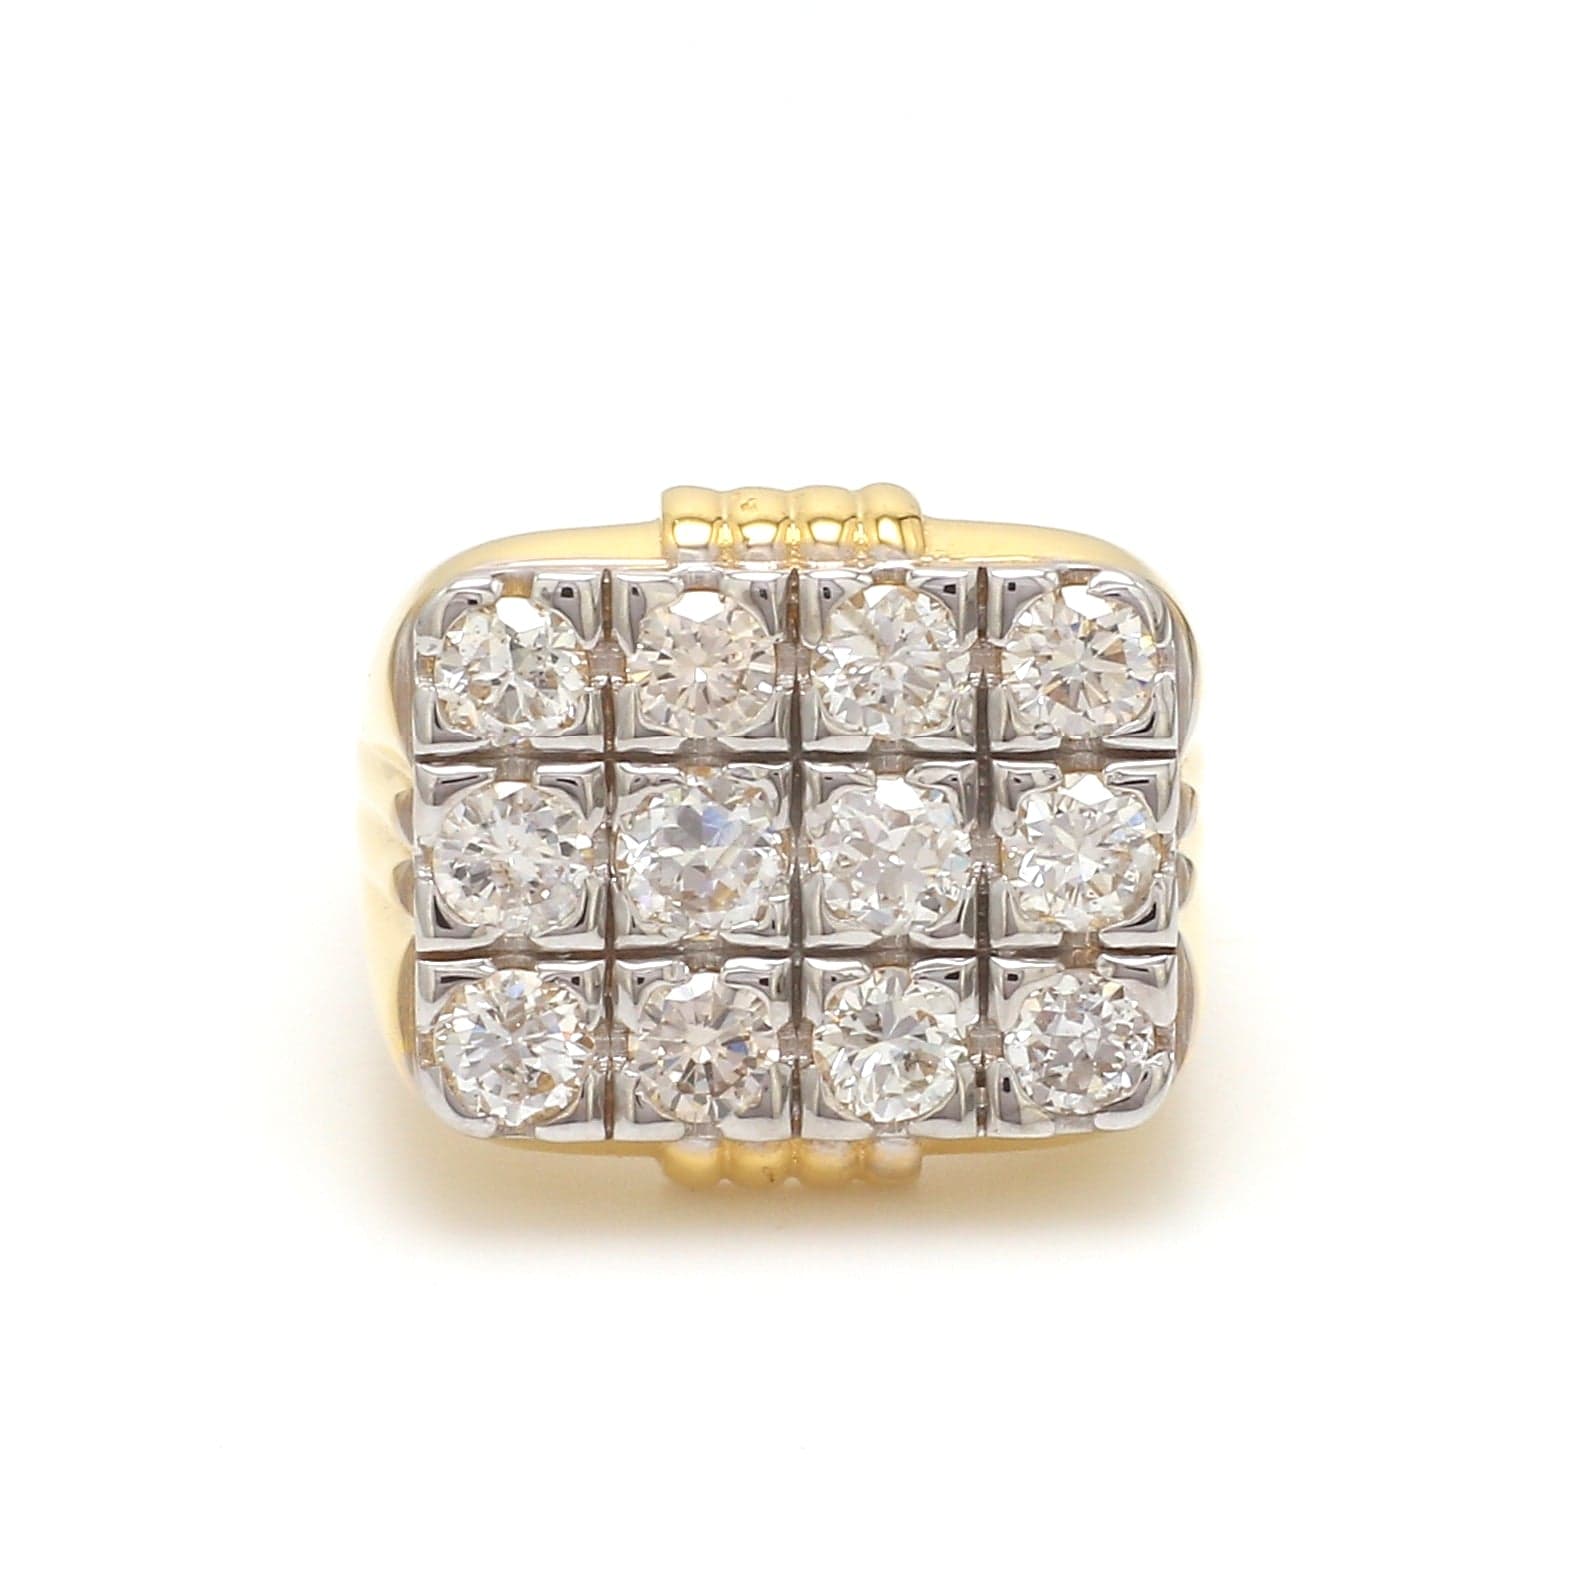 40+ Men's Diamond Ring Designs of 1 Carat With Price - Candere by Kalyan  Jewellers.